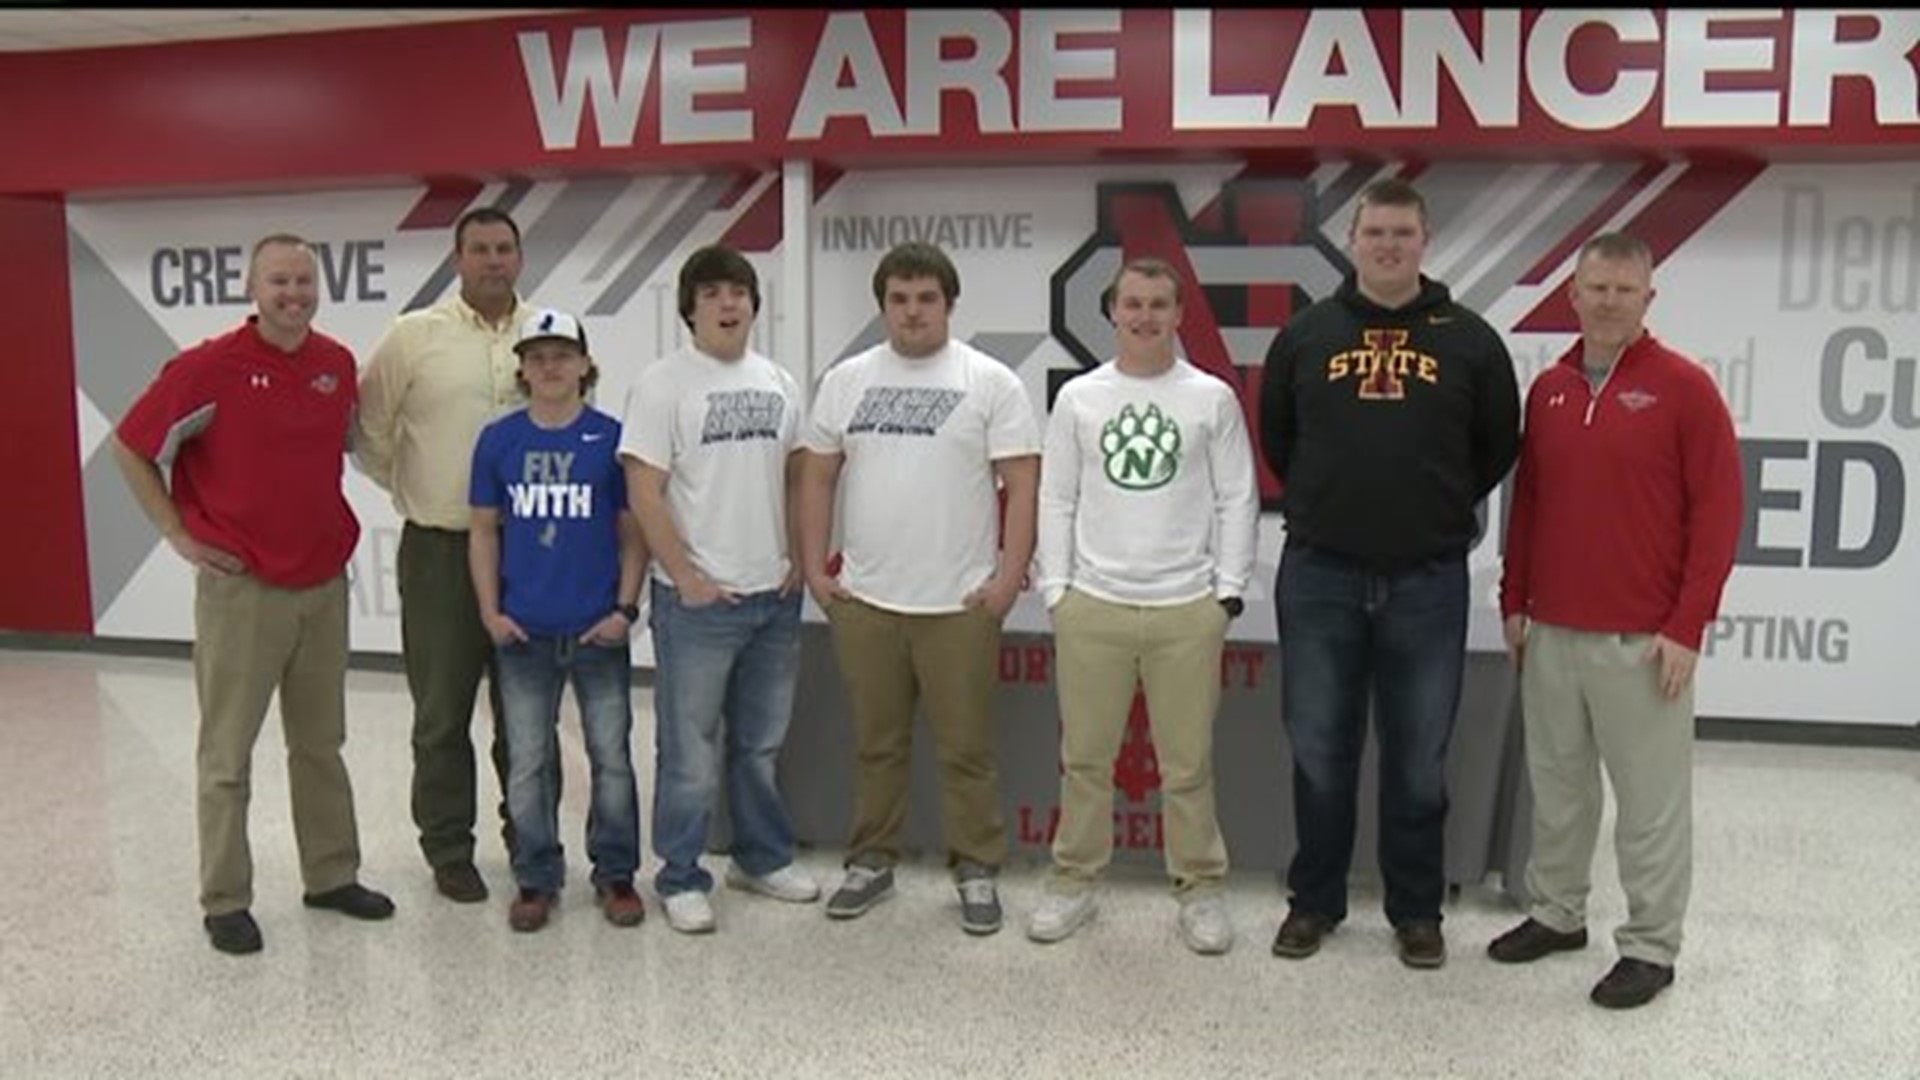 Lancers make college choices official